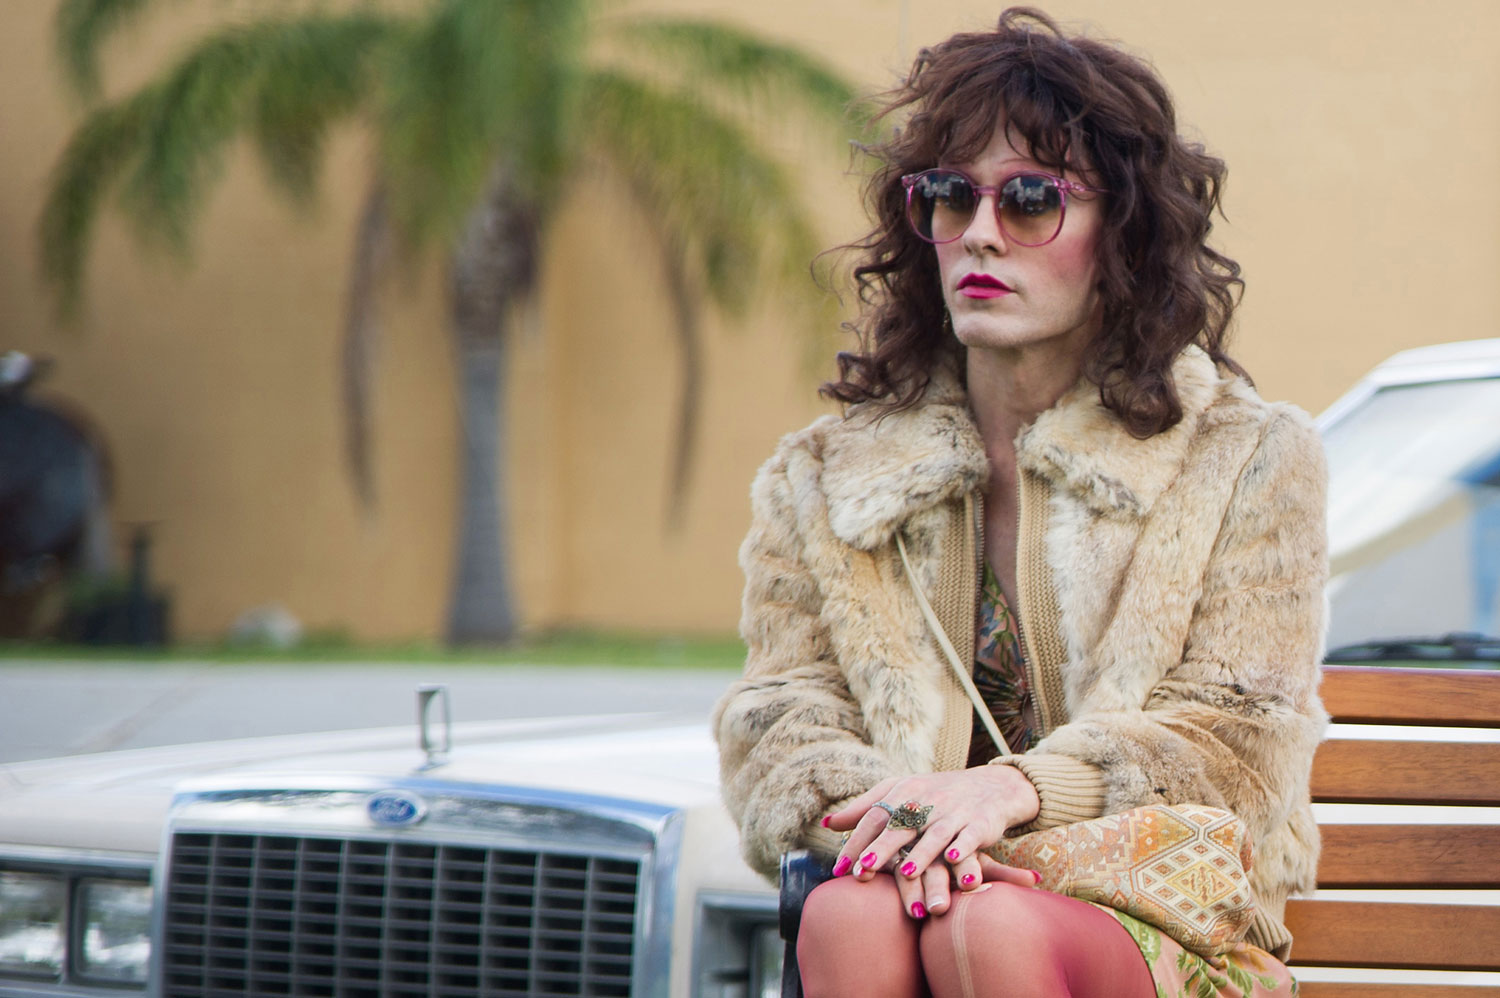 Jared Leto in Dallas Buyers Club - Popular Actors Who Played The Opposite Gender